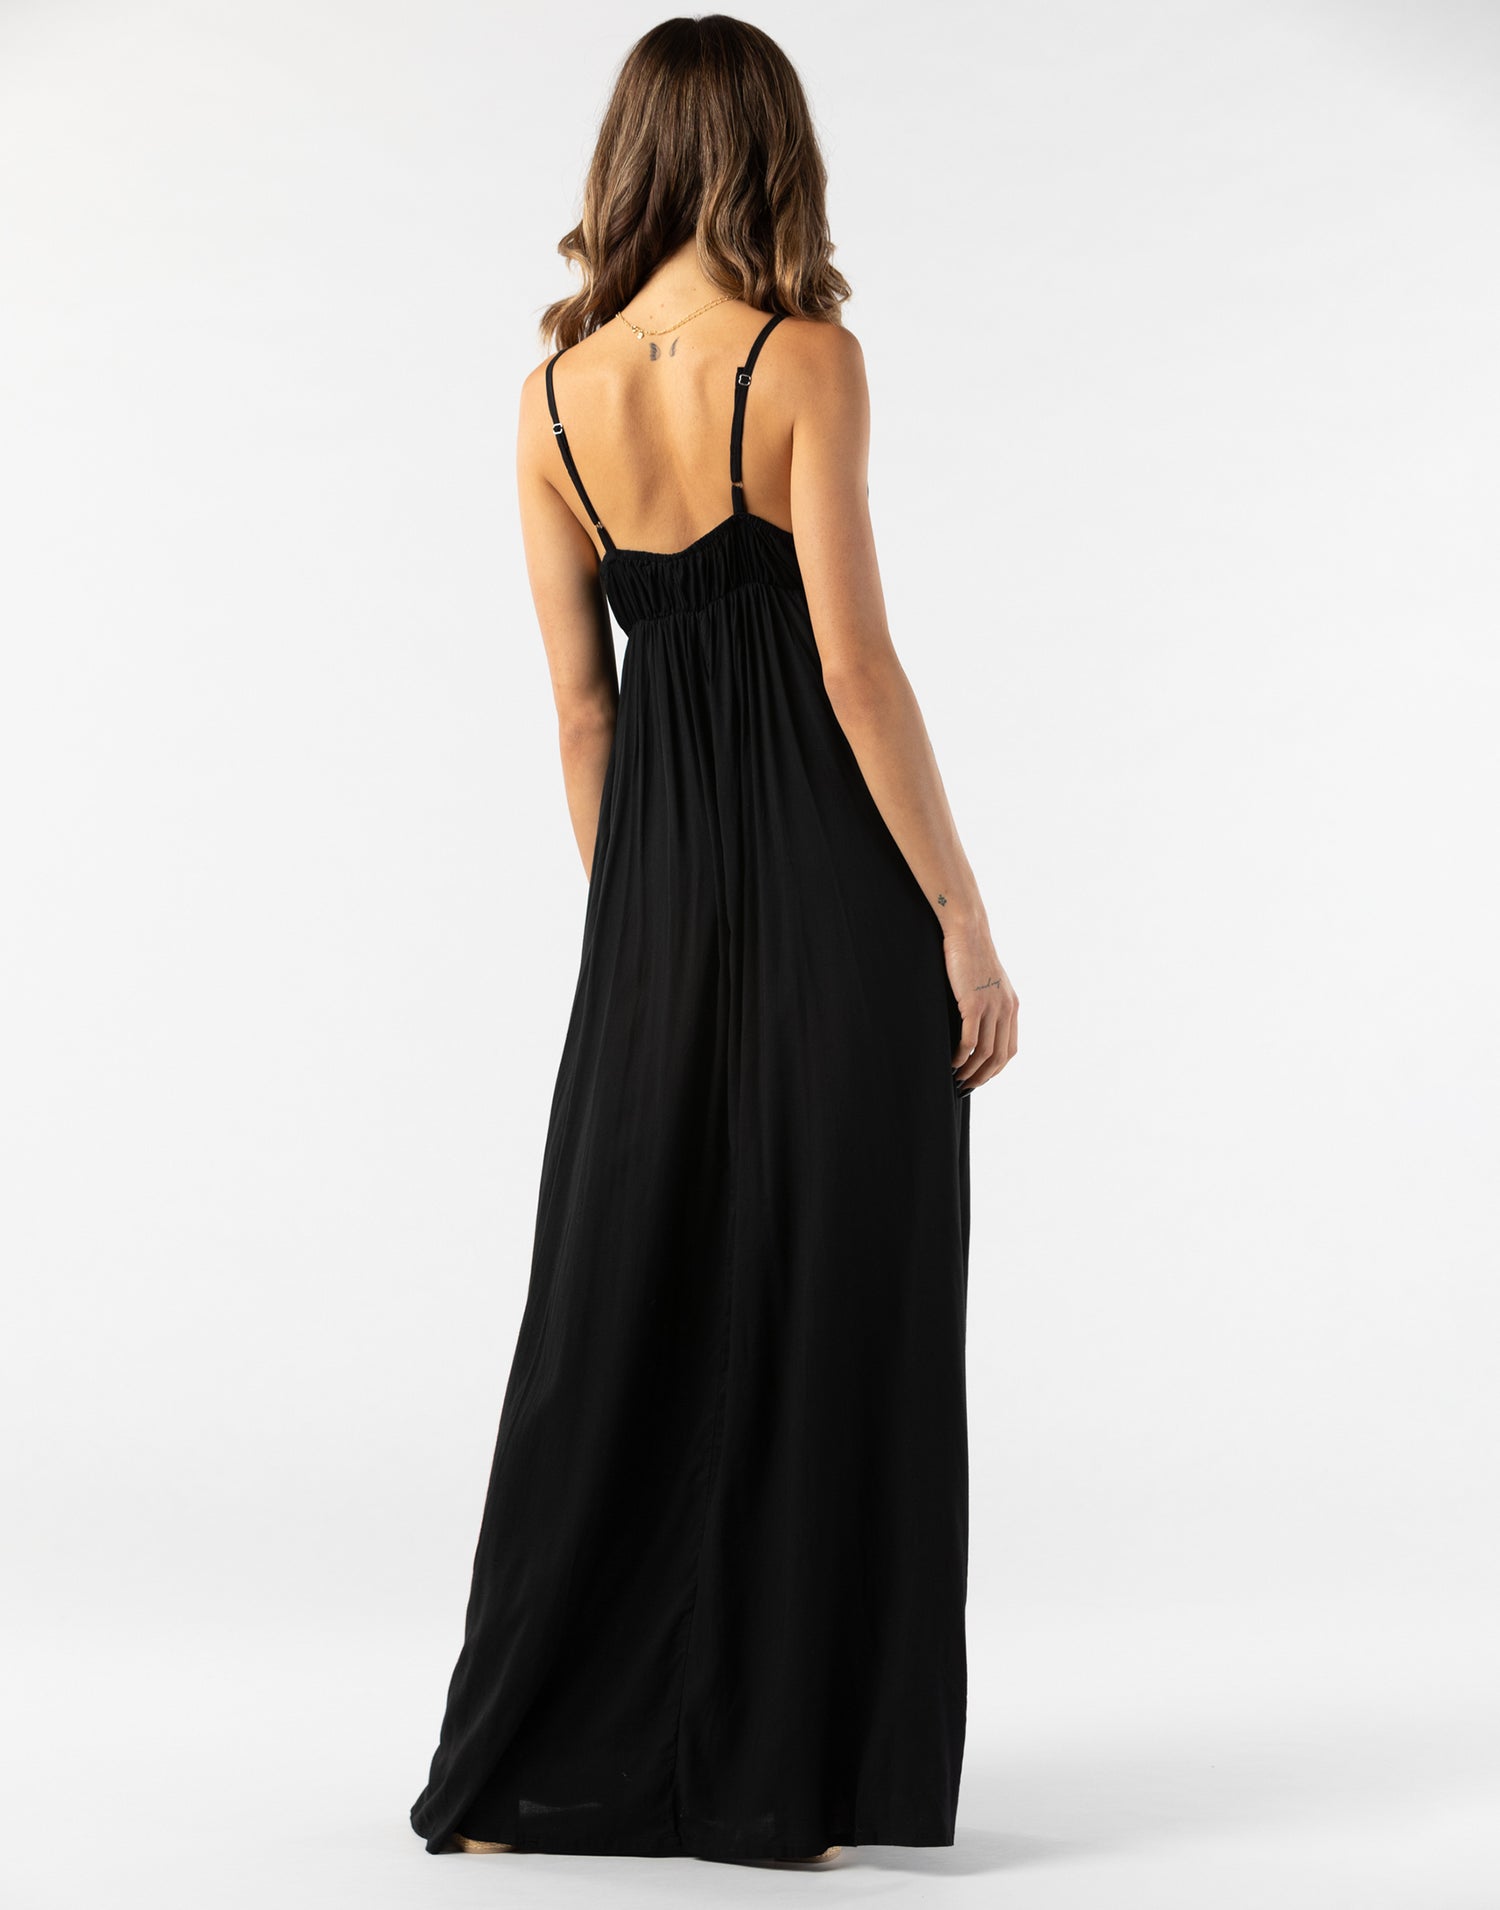 Gracie Maxi Dress by Tiare Hawaii in Black - Back View